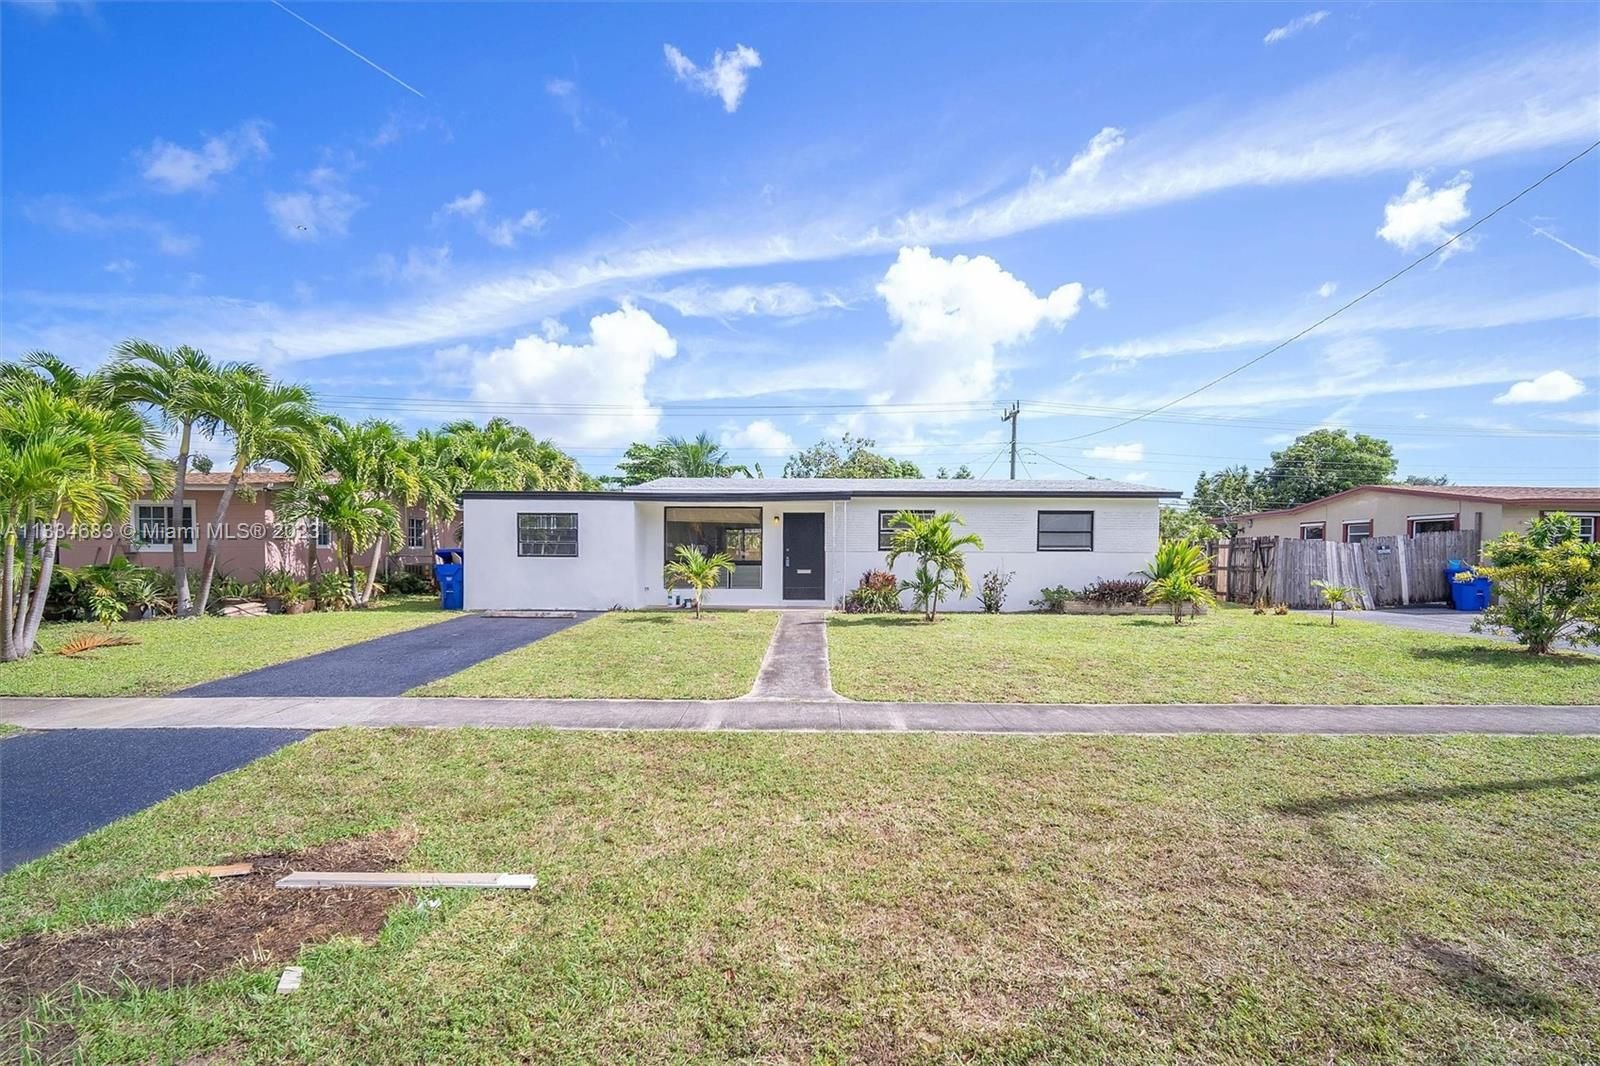 Real estate property located at 411 70th Ave, Broward County, Hollywood, FL